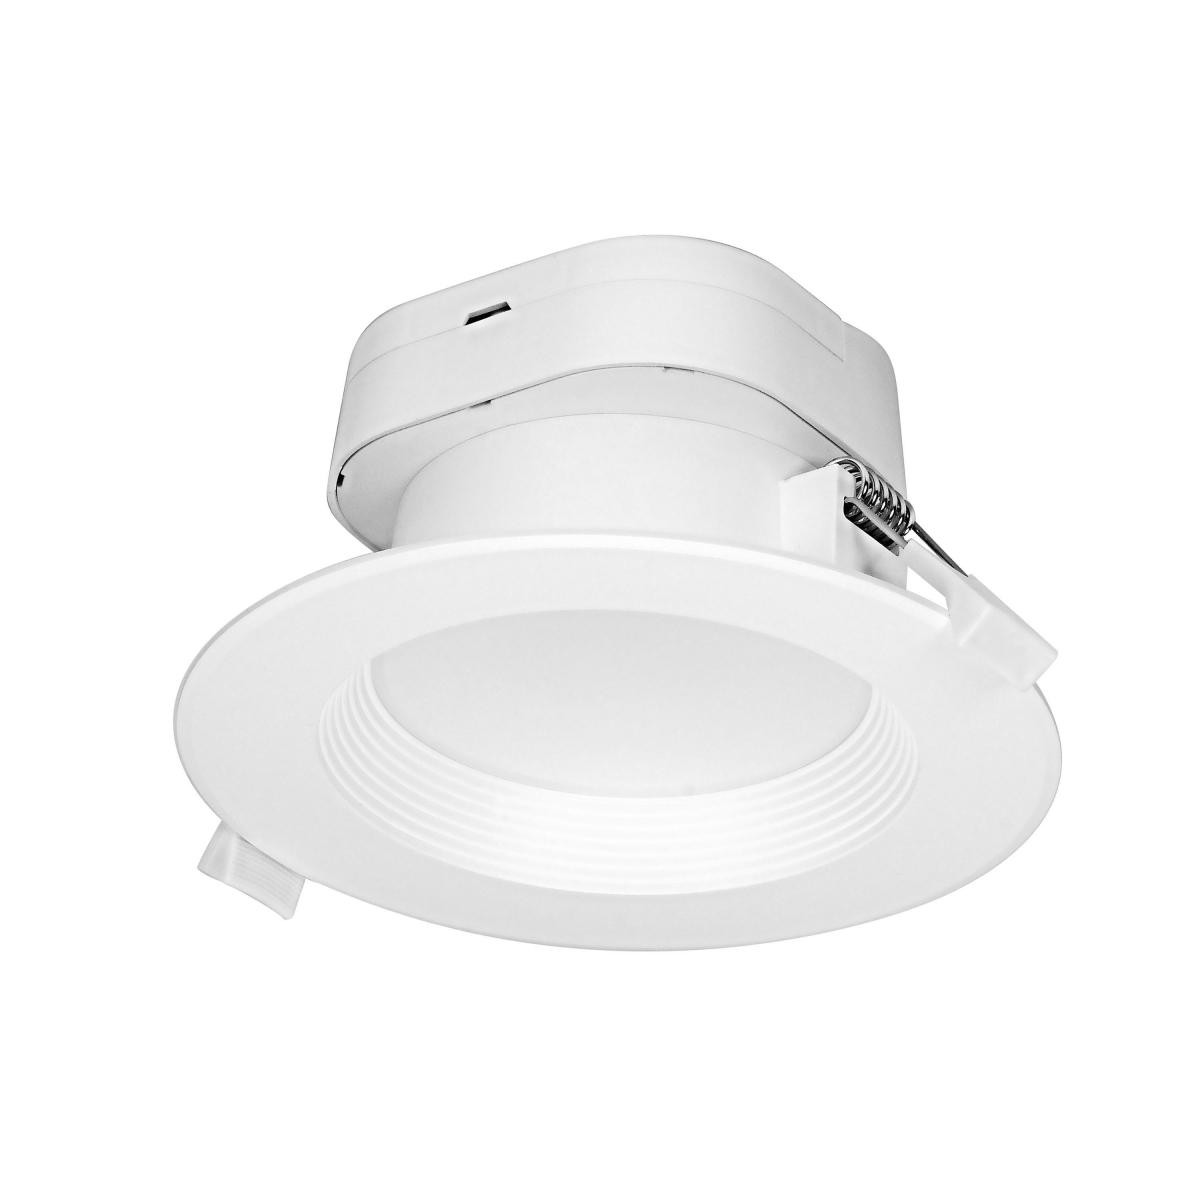 4 Inch Downlight Direct Wire - 7 Watt- 450 Lumens - 2700K Warm White - 120V - Dimmable - Recessed Can Not Required